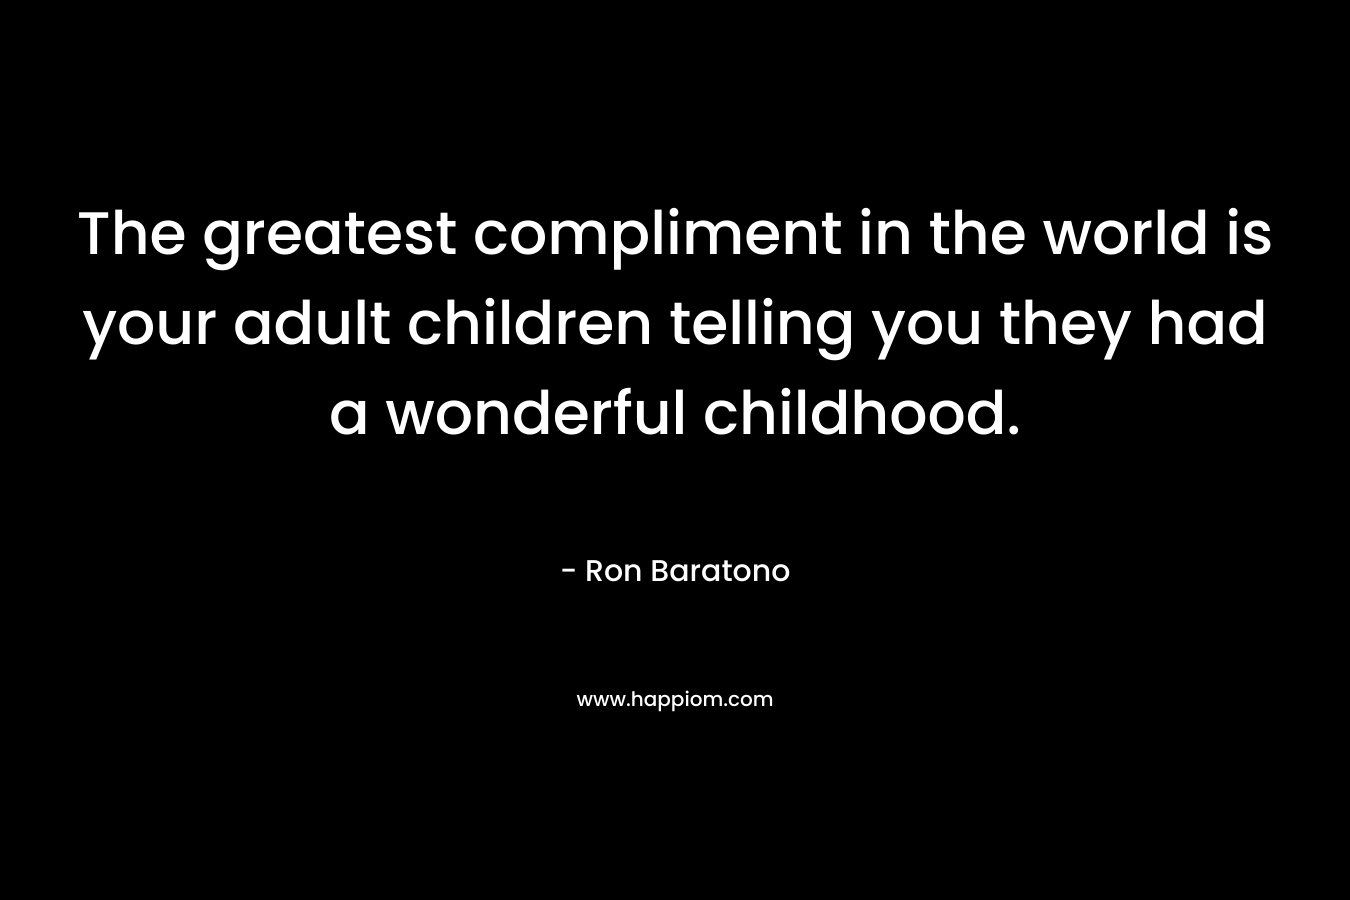 The greatest compliment in the world is your adult children telling you they had a wonderful childhood.